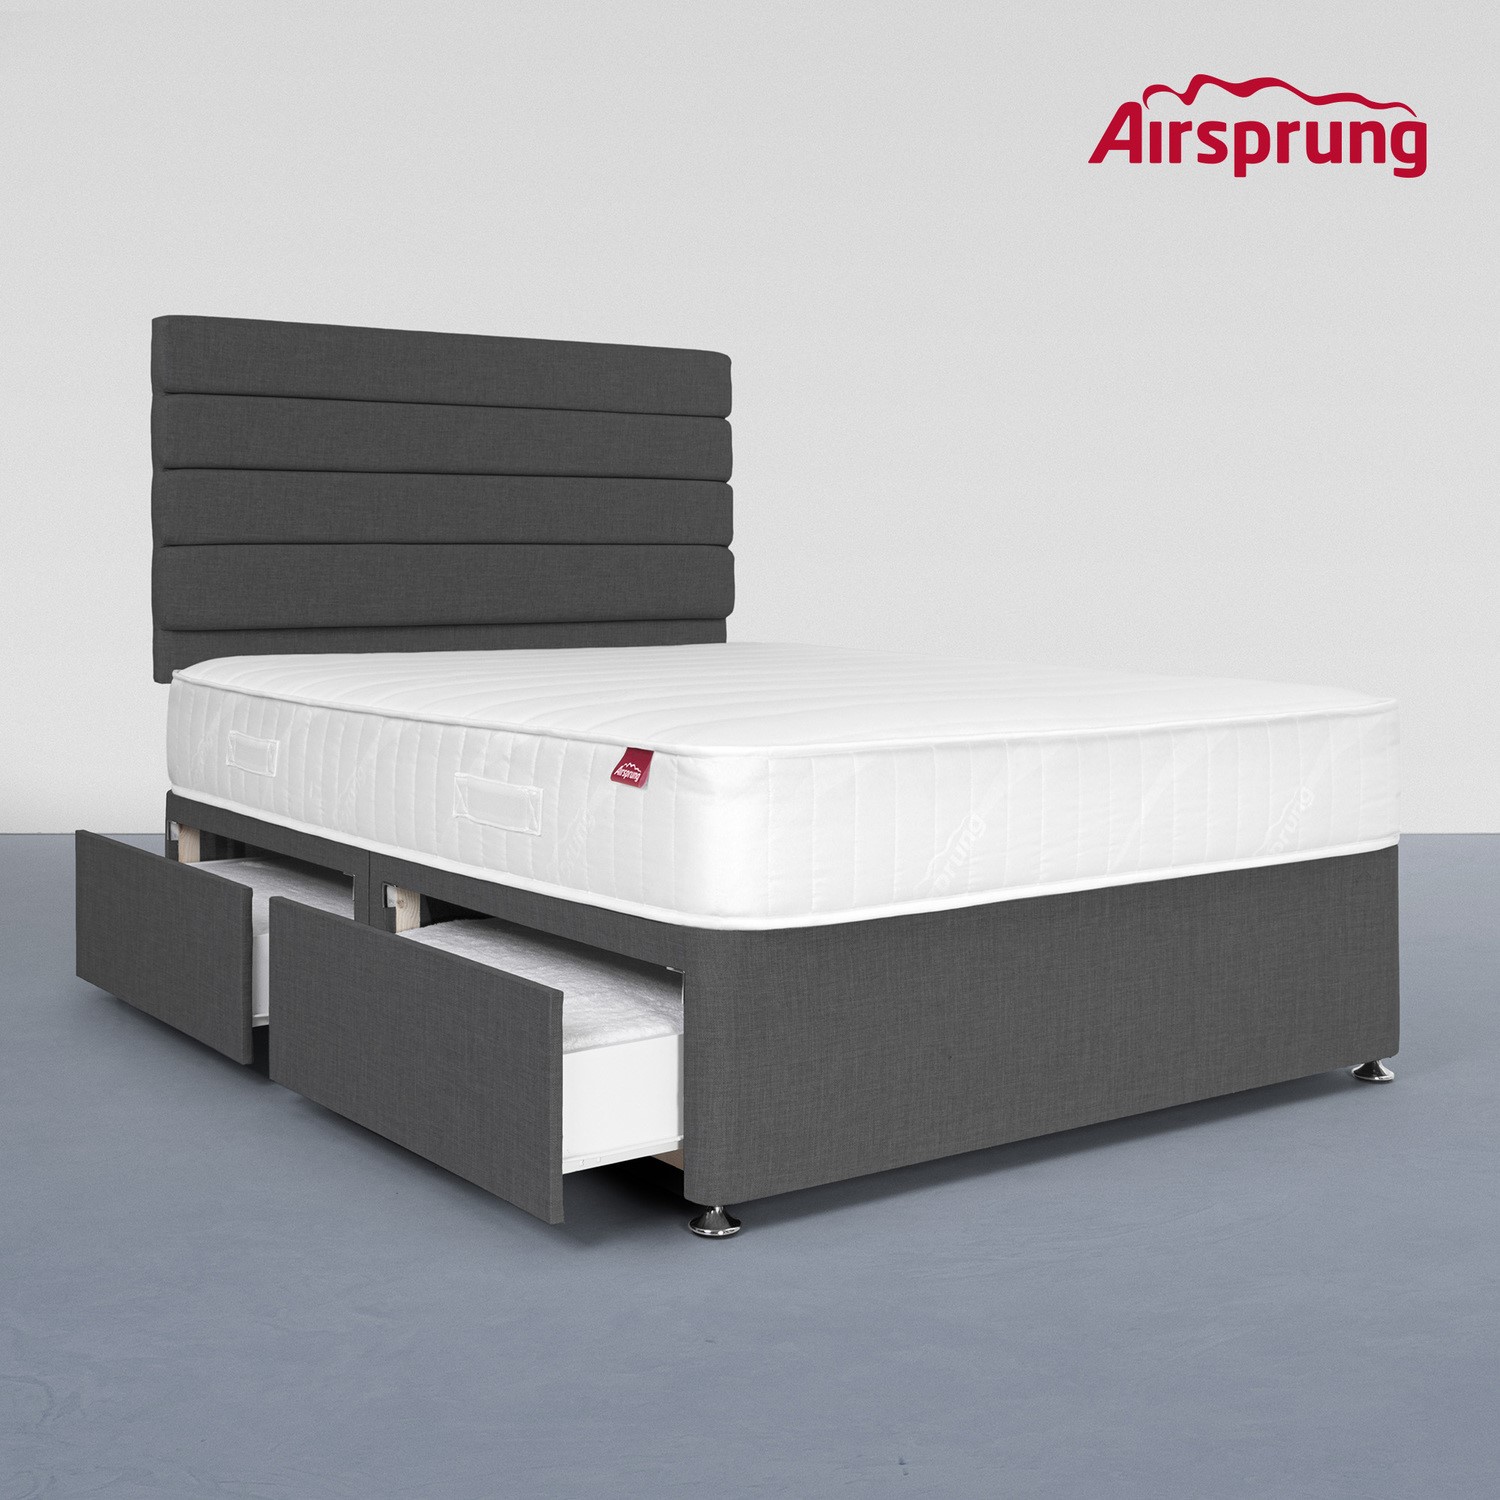 Read more about Airsprung small double 4 drawer divan bed with hybrid mattress charcoal